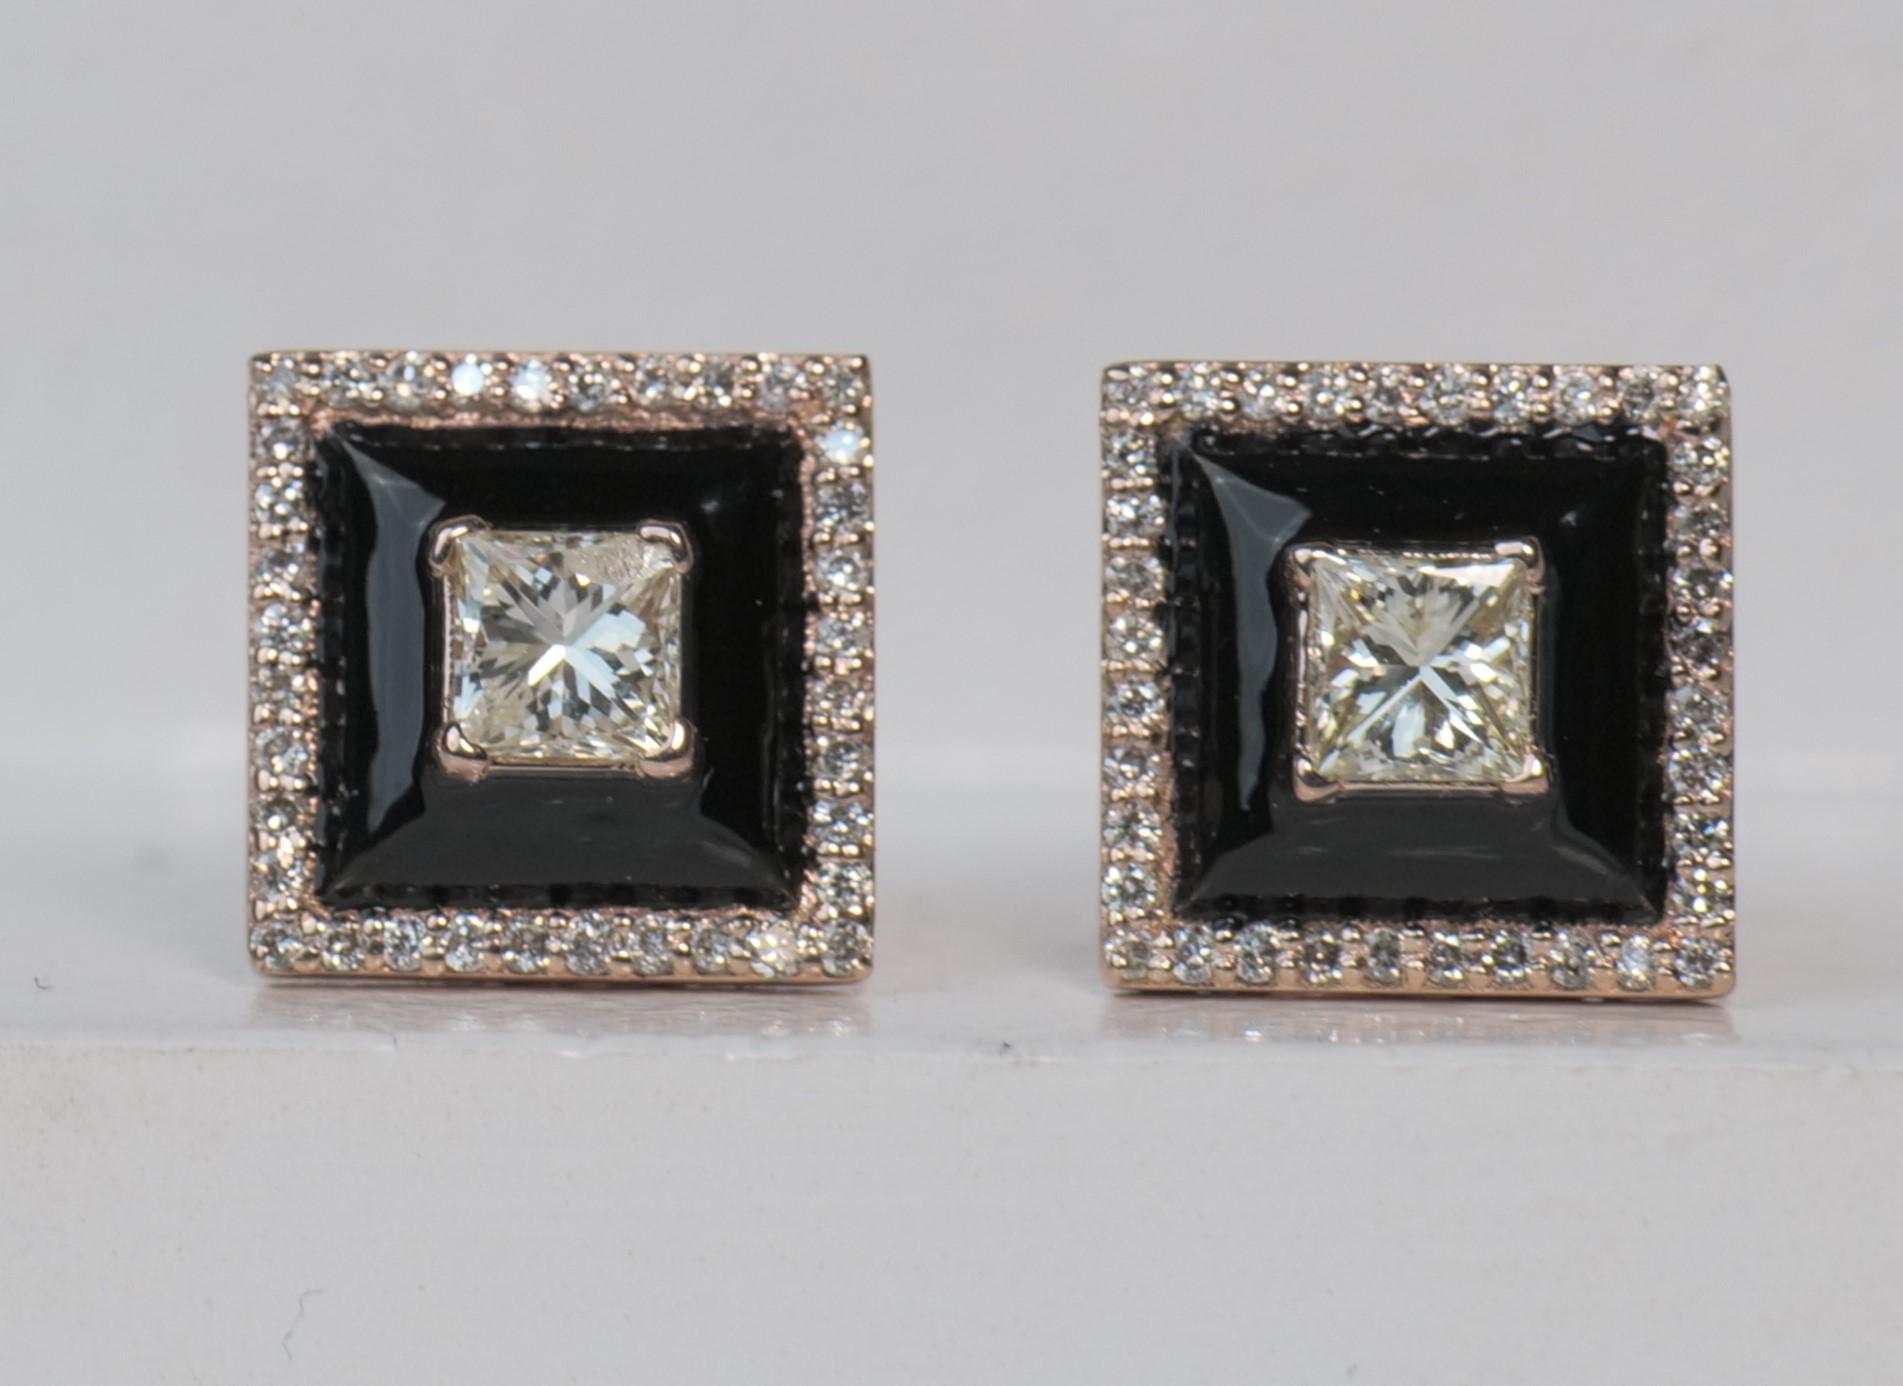 Elegant black enameled stud earrings adorned with a stunning princess-cut diamond at the center. Surrounding the princess-cut diamond, there is exquisite enameling that adds a touch of sophistication. The border of the earrings showcases round